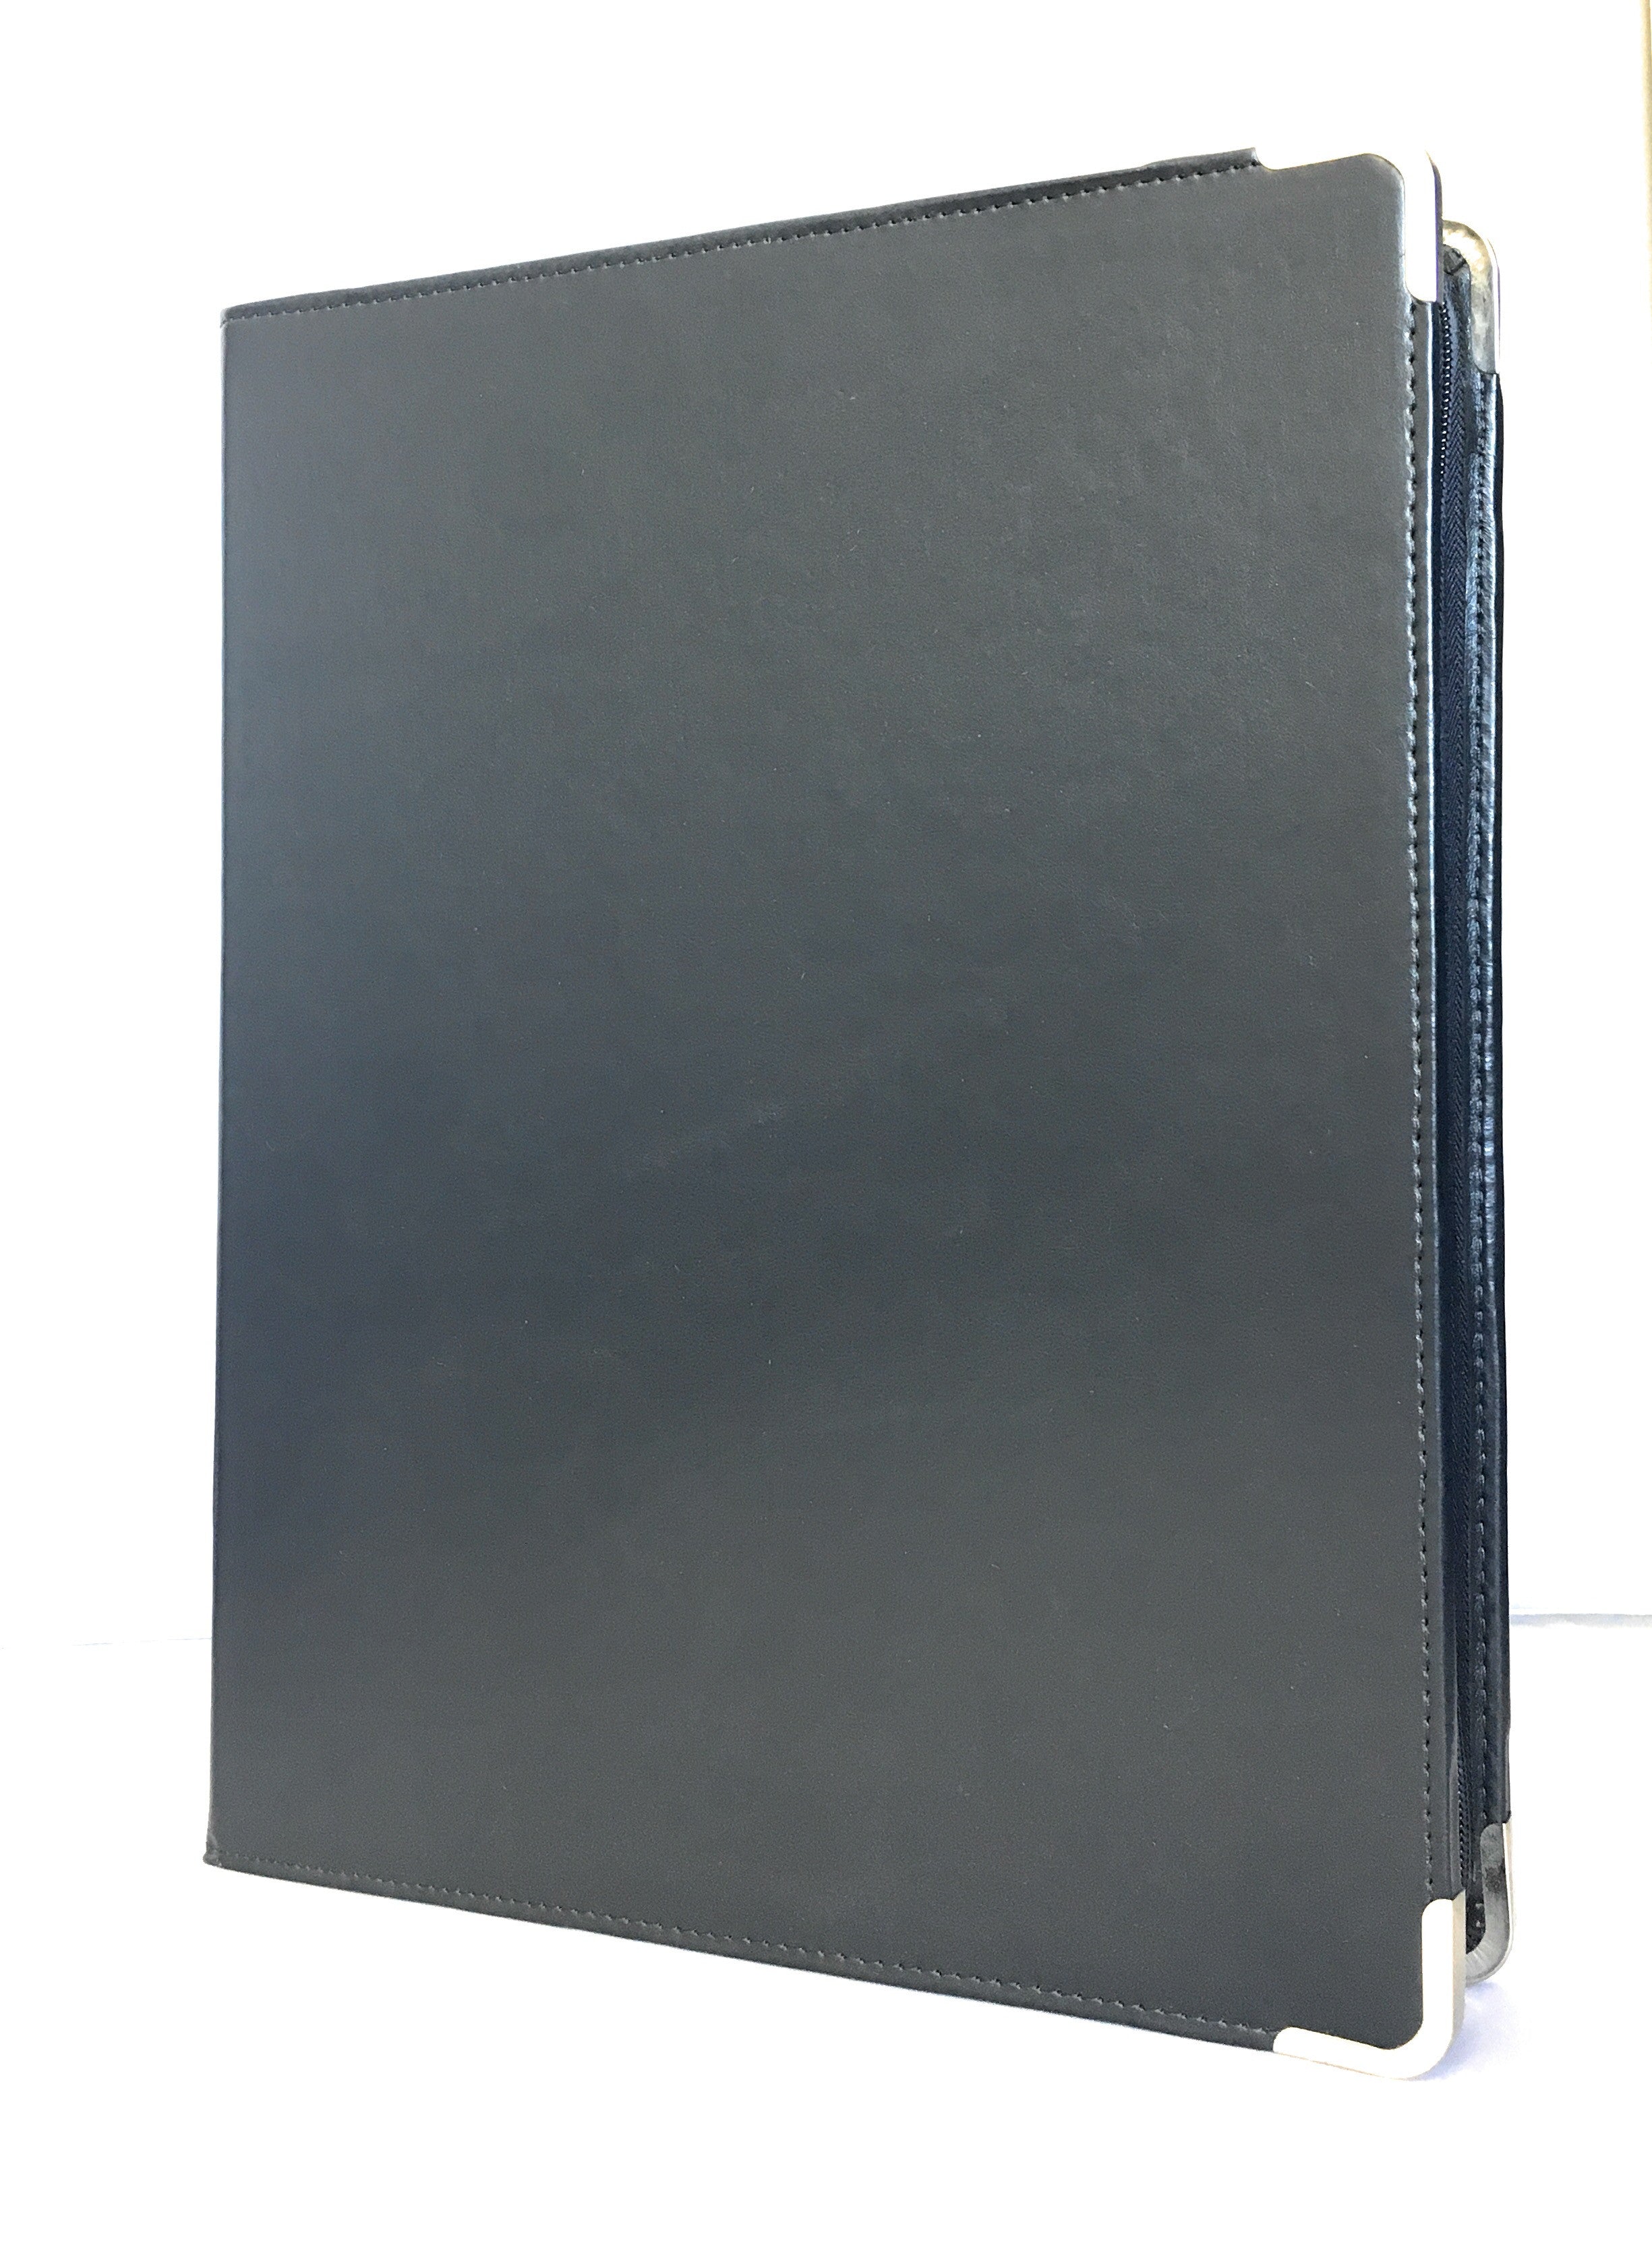 Professional Zippered 3-Ring Business Card Book, Includes 10 Sheets and Holds 200 Cards, Navy Blue - RingBinderDepot.com